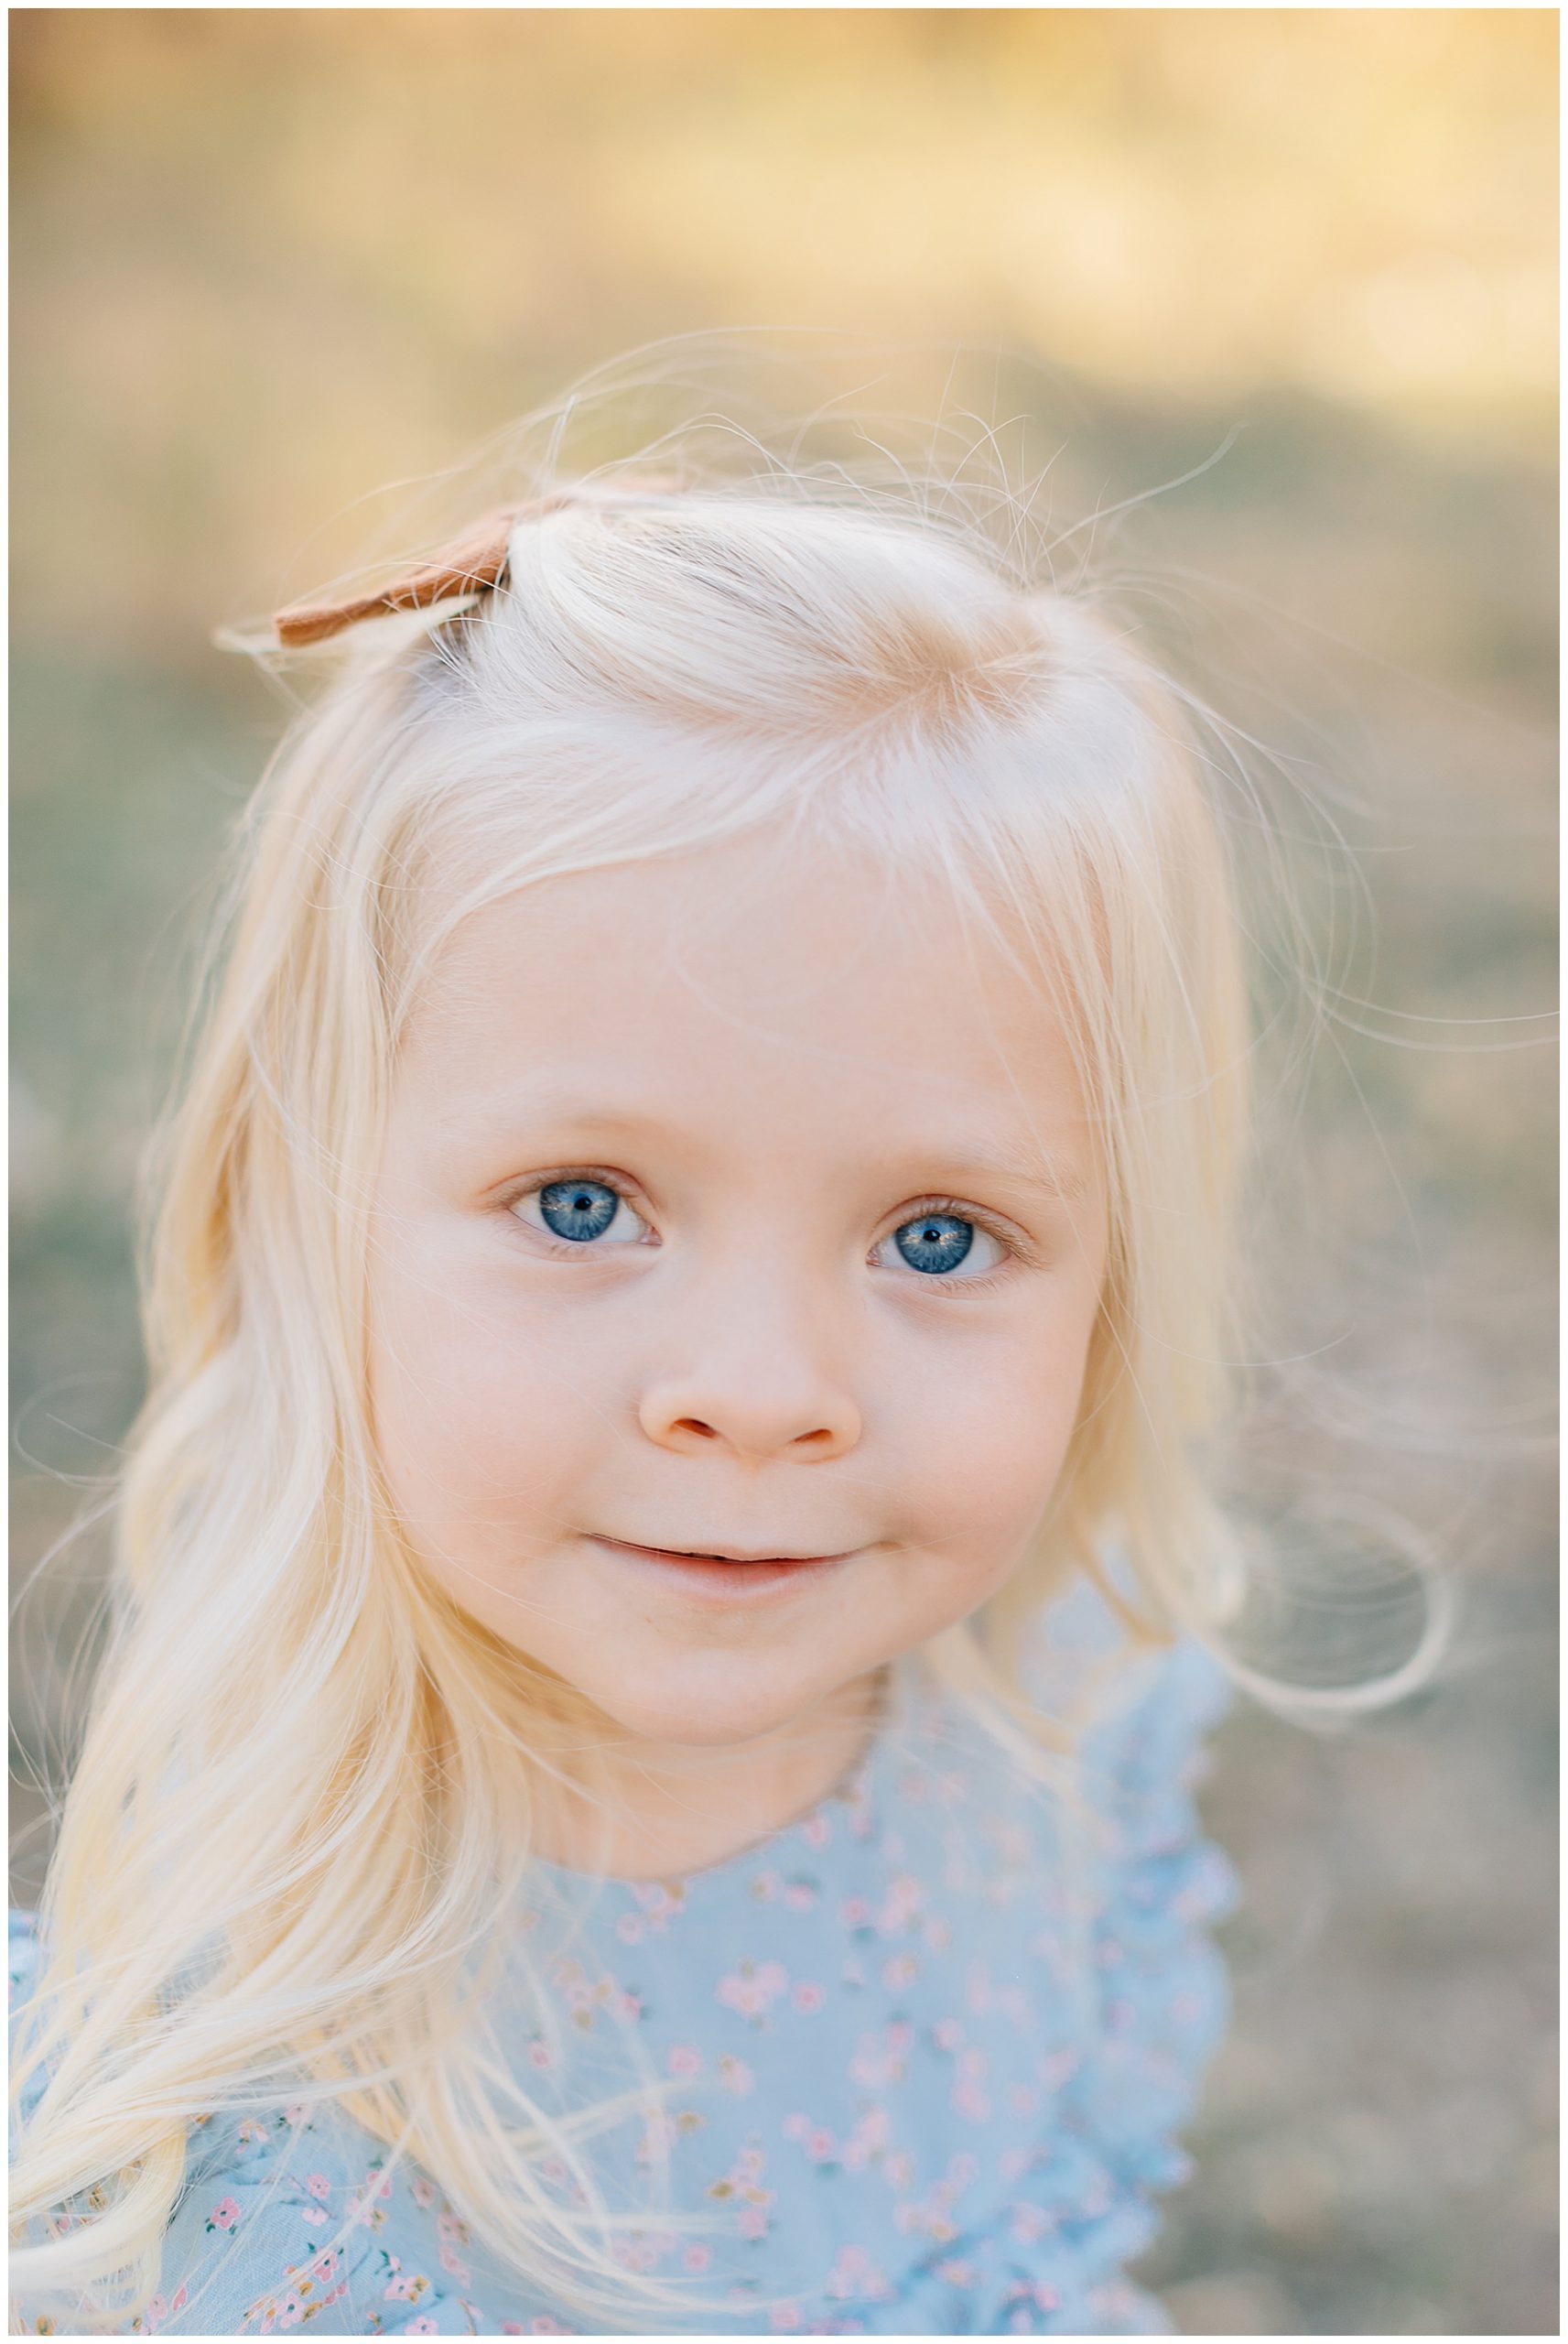 Utah Family Photographer | Hobble Creek Canyon Pictures